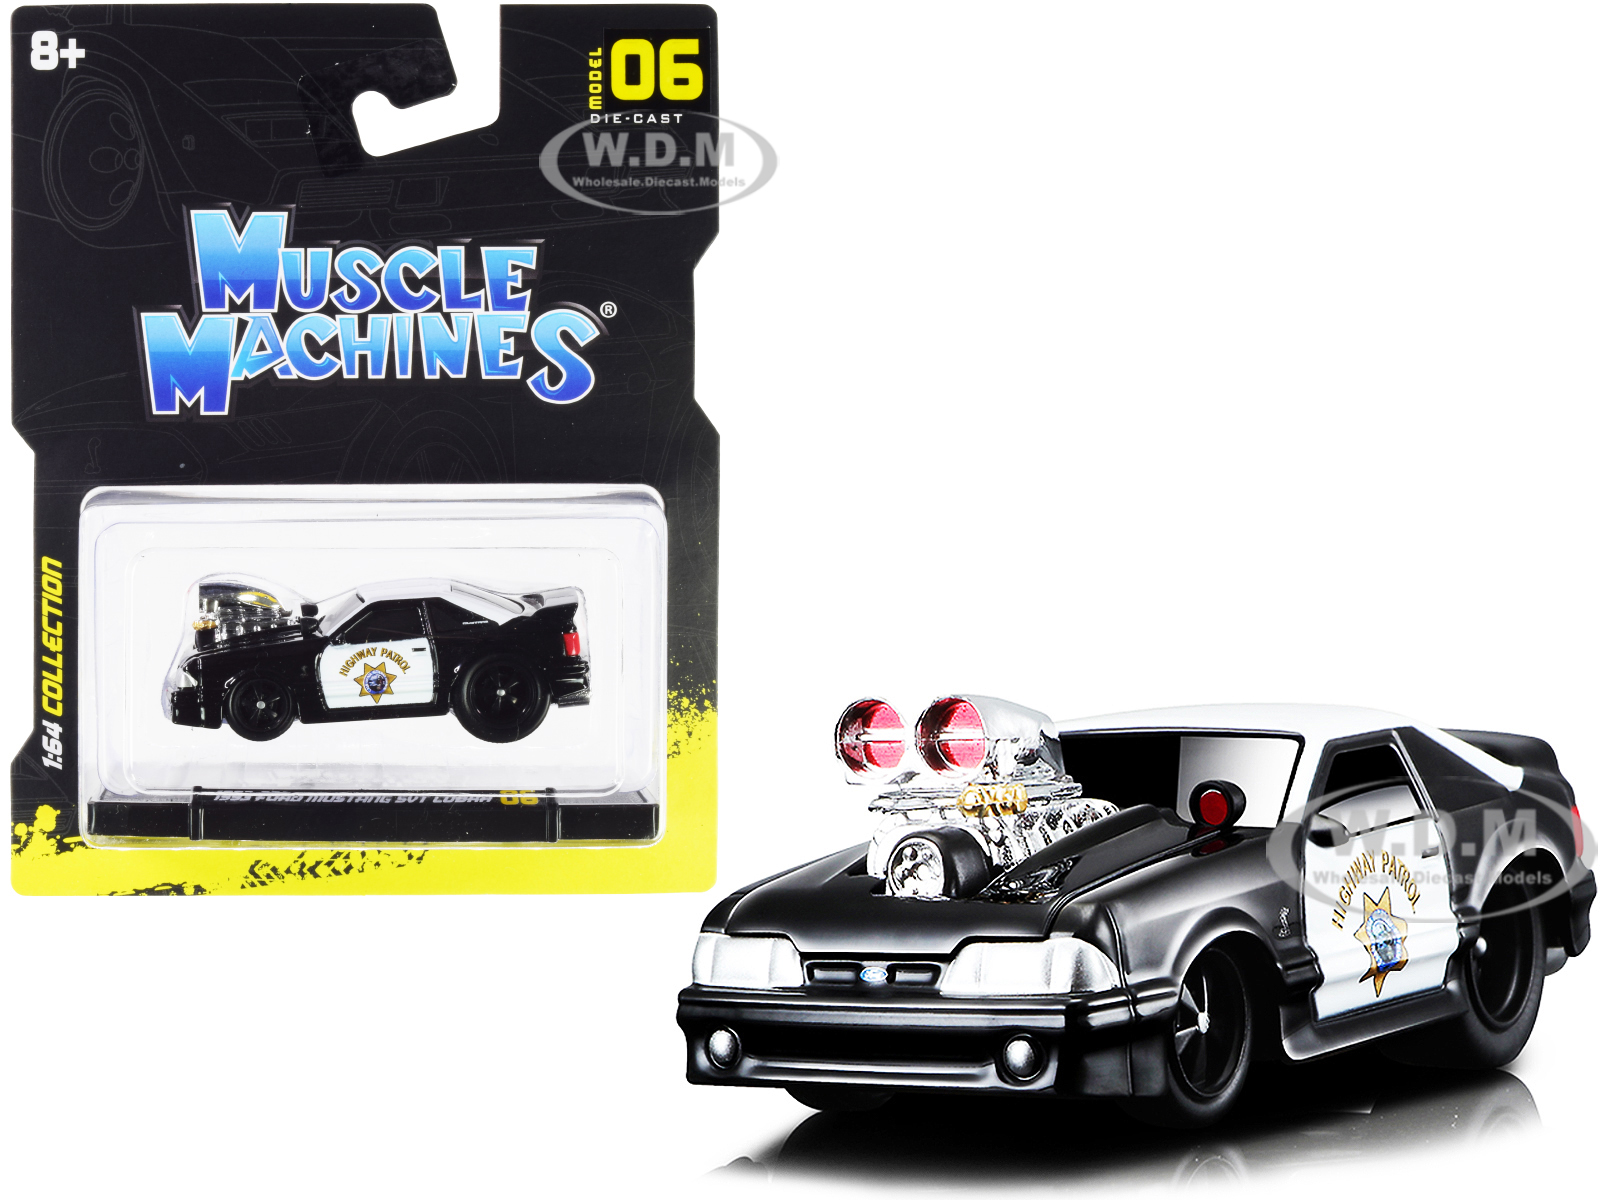 1993 Ford Mustang SVT Cobra CHP "California Highway Patrol" Black and White 1/64 Diecast Model Car by Muscle Machines